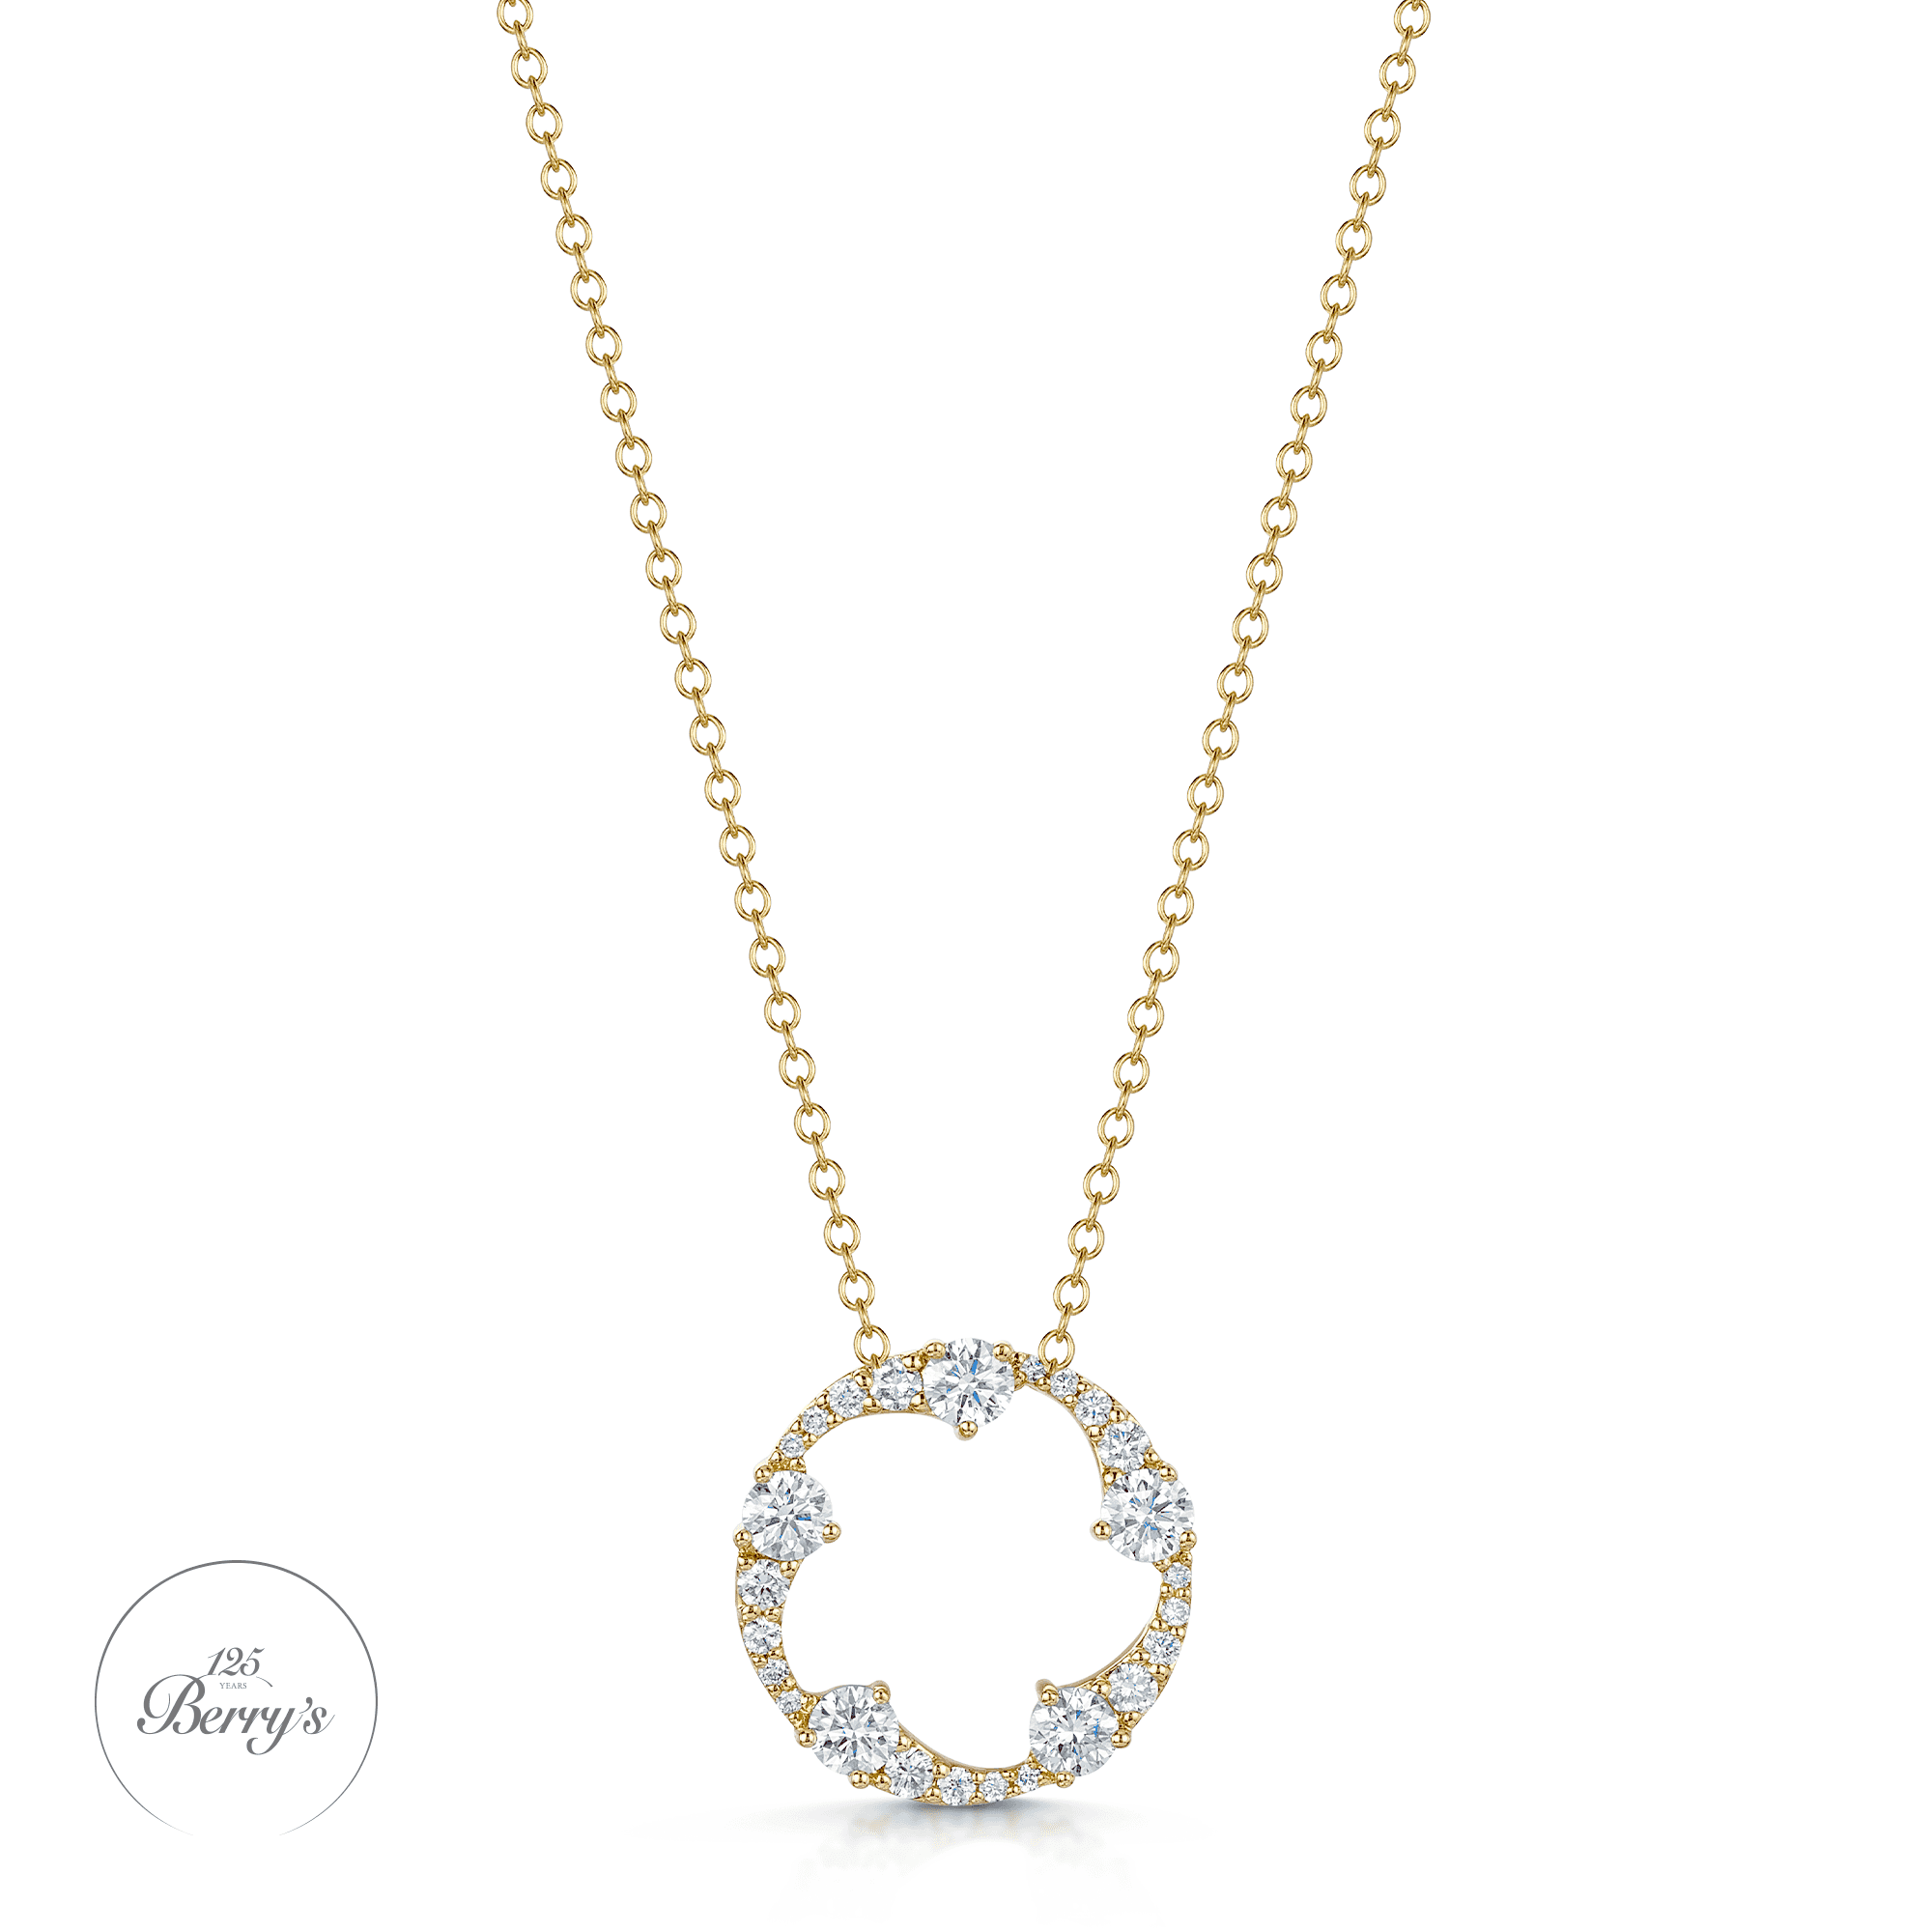 OPEIA Collection 18ct Rose Gold Diamond Fancy Large Circle Pendant With Chain